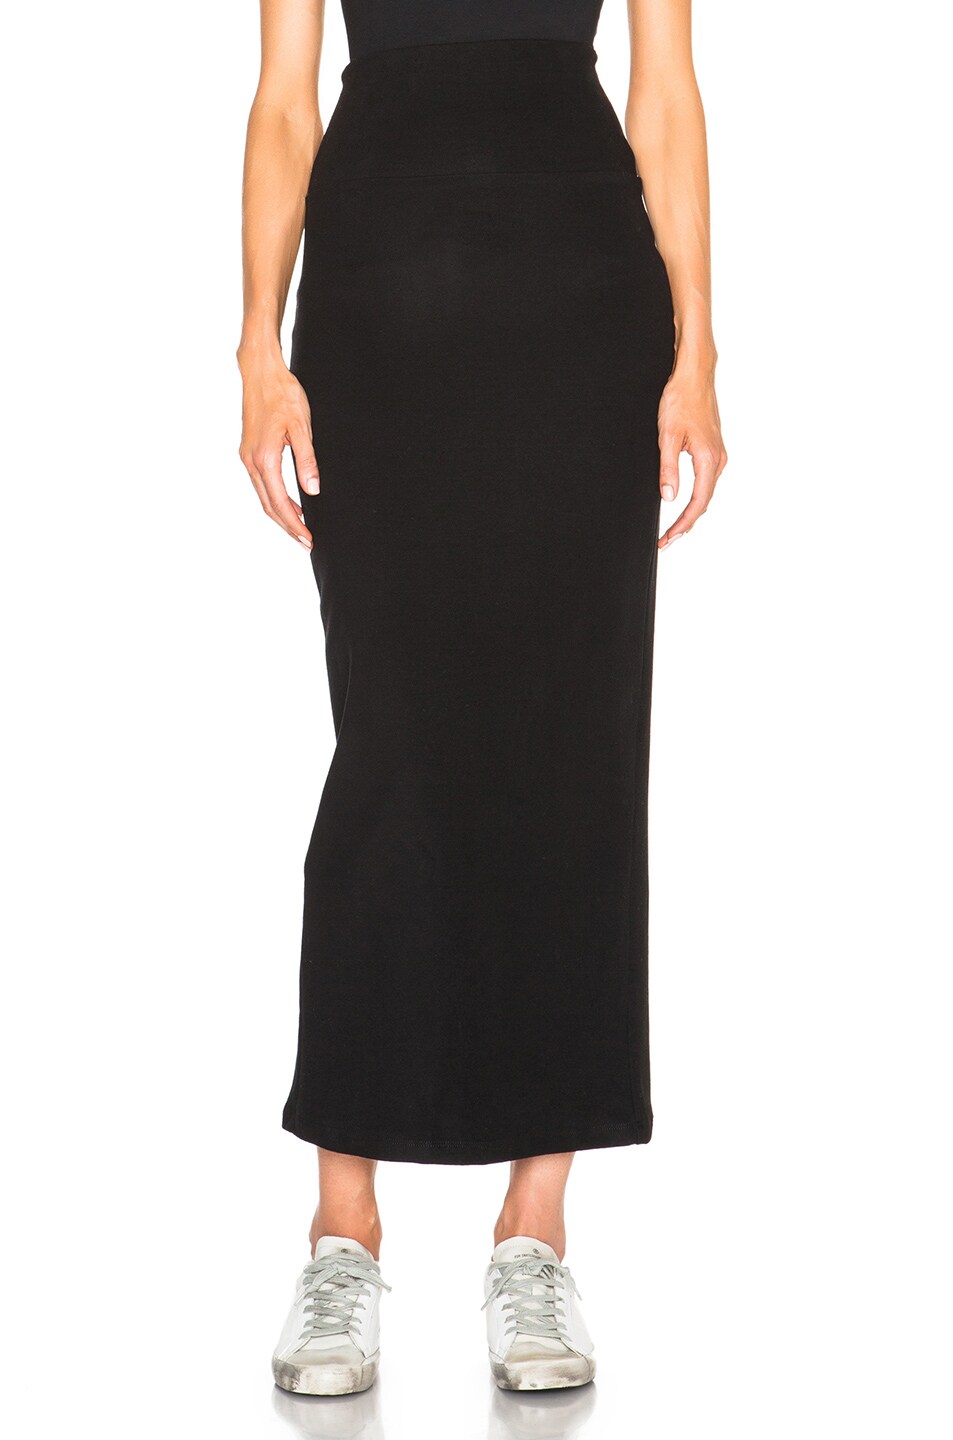 Image 1 of James Perse Knit Pencil Skirt in Black